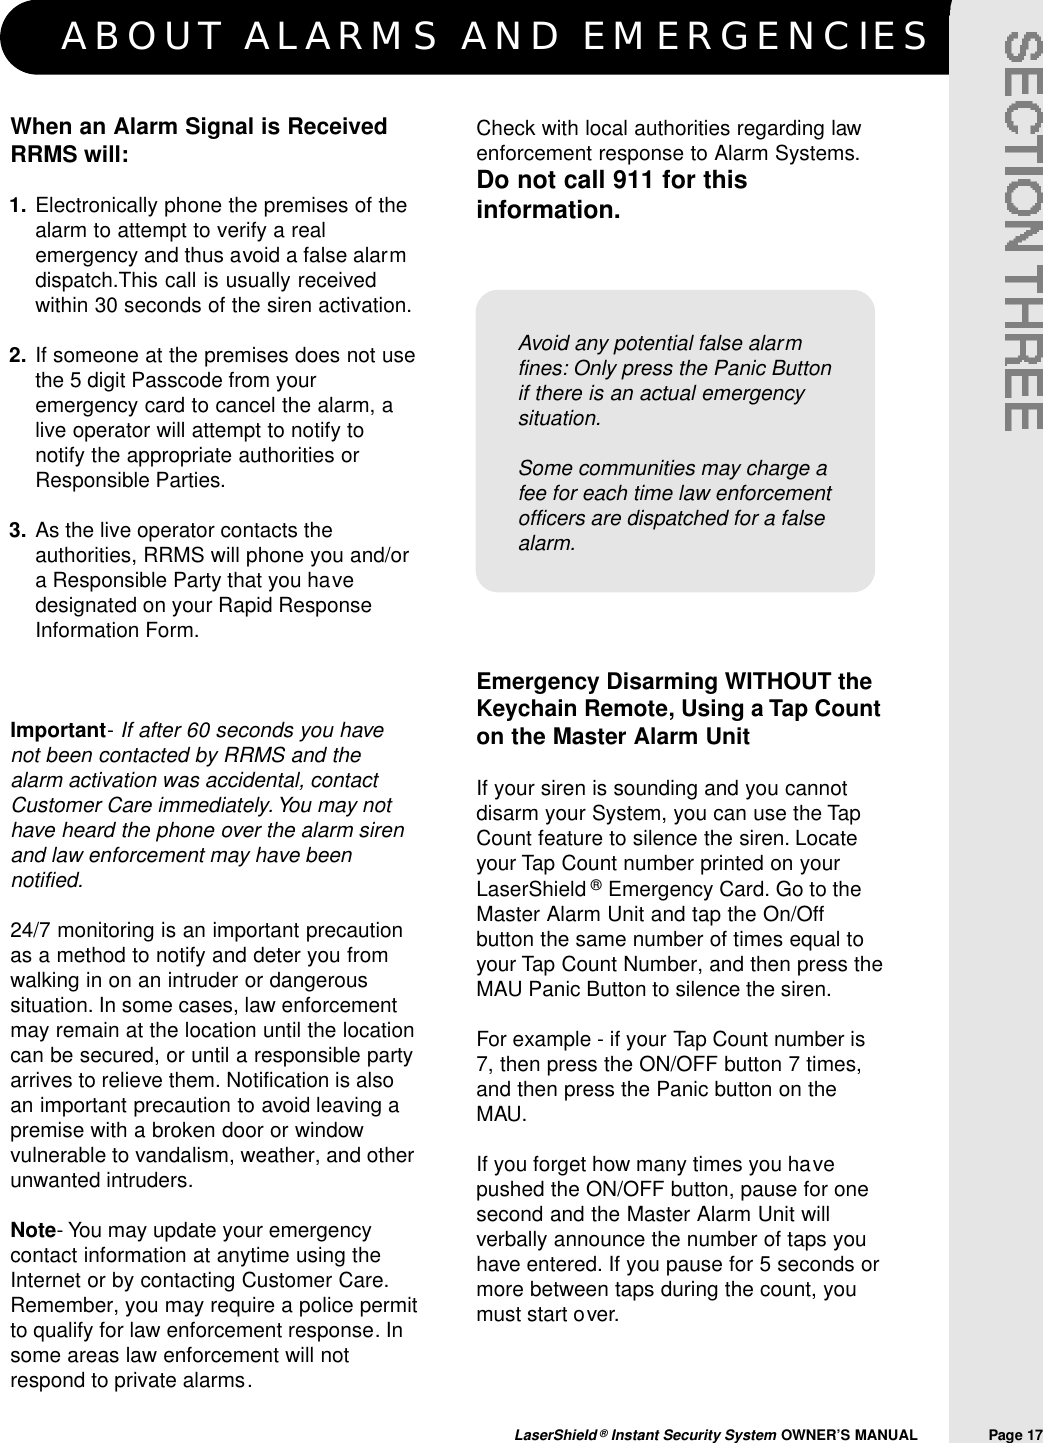 ABOUT ALARMS AND EMERGENCIESLaserShield ®Instant Security System OWNER’S MANUAL                Page 17When an Alarm Signal is ReceivedRRMS will:Electronically phone the premises of thealarm to attempt to verify a realemergency and thus avoid a false alarmdispatch.This call is usually receivedwithin 30 seconds of the siren activation.If someone at the premises does not usethe 5 digit Passcode from youremergency card to cancel the alarm, alive operator will attempt to notify tonotify the appropriate authorities orResponsible Parties.As the live operator contacts theauthorities, RRMS will phone you and/ora Responsible Party that you havedesignated on your Rapid ResponseInformation Form.Important-If after 60 seconds you havenot been contacted by RRMS and thealarm activation was accidental, contactCustomer Care immediately. You may nothave heard the phone over the alarm sirenand law enforcement may have beennotified.24/7 monitoring is an important precautionas a method to notify and deter you fromwalking in on an intruder or dangeroussituation. In some cases, law enforcementmay remain at the location until the locationcan be secured, or until a responsible partyarrives to relieve them. Notification is alsoan important precaution to avoid leaving apremise with a broken door or windowvulnerable to vandalism, weather, and otherunwanted intruders.Note- You may update your emergencycontact information at anytime using theInternet or by contacting Customer Care.Remember, you may require a police permitto qualify for law enforcement response. Insome areas law enforcement will notrespond to private alarms.Check with local authorities regarding lawenforcement response to Alarm Systems.Do not call 911 for thisinformation.1.2.3.Emergency Disarming WITHOUT theKeychain Remote, Using a Tap Counton the Master Alarm UnitIf your siren is sounding and you cannotdisarm your System, you can use the TapCount feature to silence the siren. Locateyour Tap Count number printed on yourLaserShield ®Emergency Card. Go to theMaster Alarm Unit and tap the On/Offbutton the same number of times equal toyour Tap Count Number, and then press theMAU Panic Button to silence the siren.For example - if your Tap Count number is7, then press the ON/OFF button 7 times,and then press the Panic button on theMAU.If you forget how many times you havepushed the ON/OFF button, pause for onesecond and the Master Alarm Unit willverbally announce the number of taps youhave entered. If you pause for 5 seconds ormore between taps during the count, youmust start over.Avoid any potential false alarmfines: Only press the Panic Buttonif there is an actual emergencysituation.Some communities may charge afee for each time law enforcementofficers are dispatched for a falsealarm.